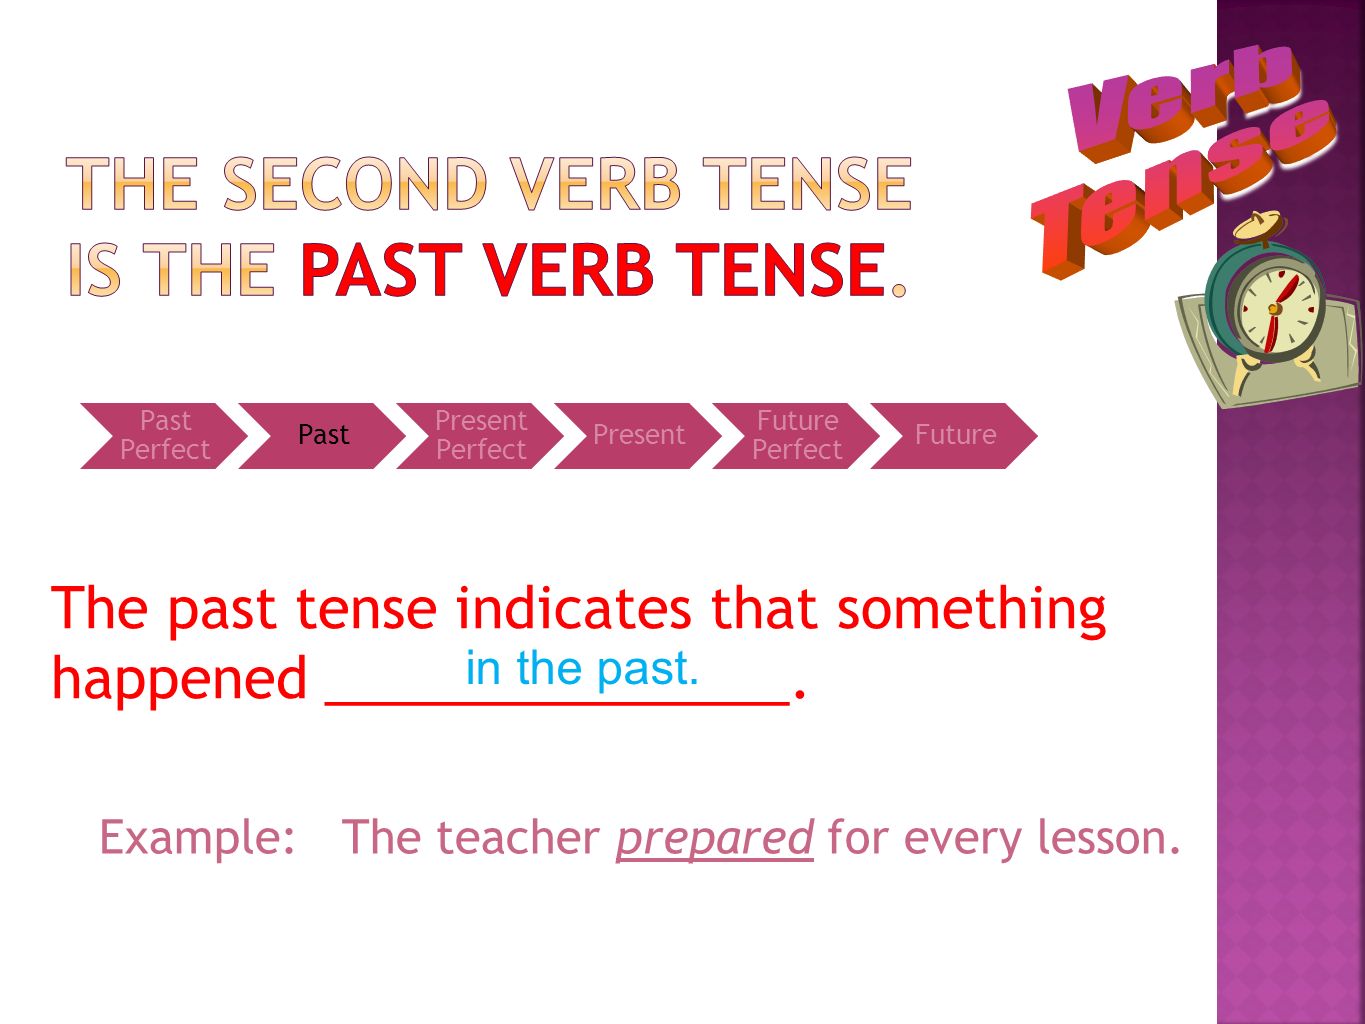 The second verb tense is the past verb tense.